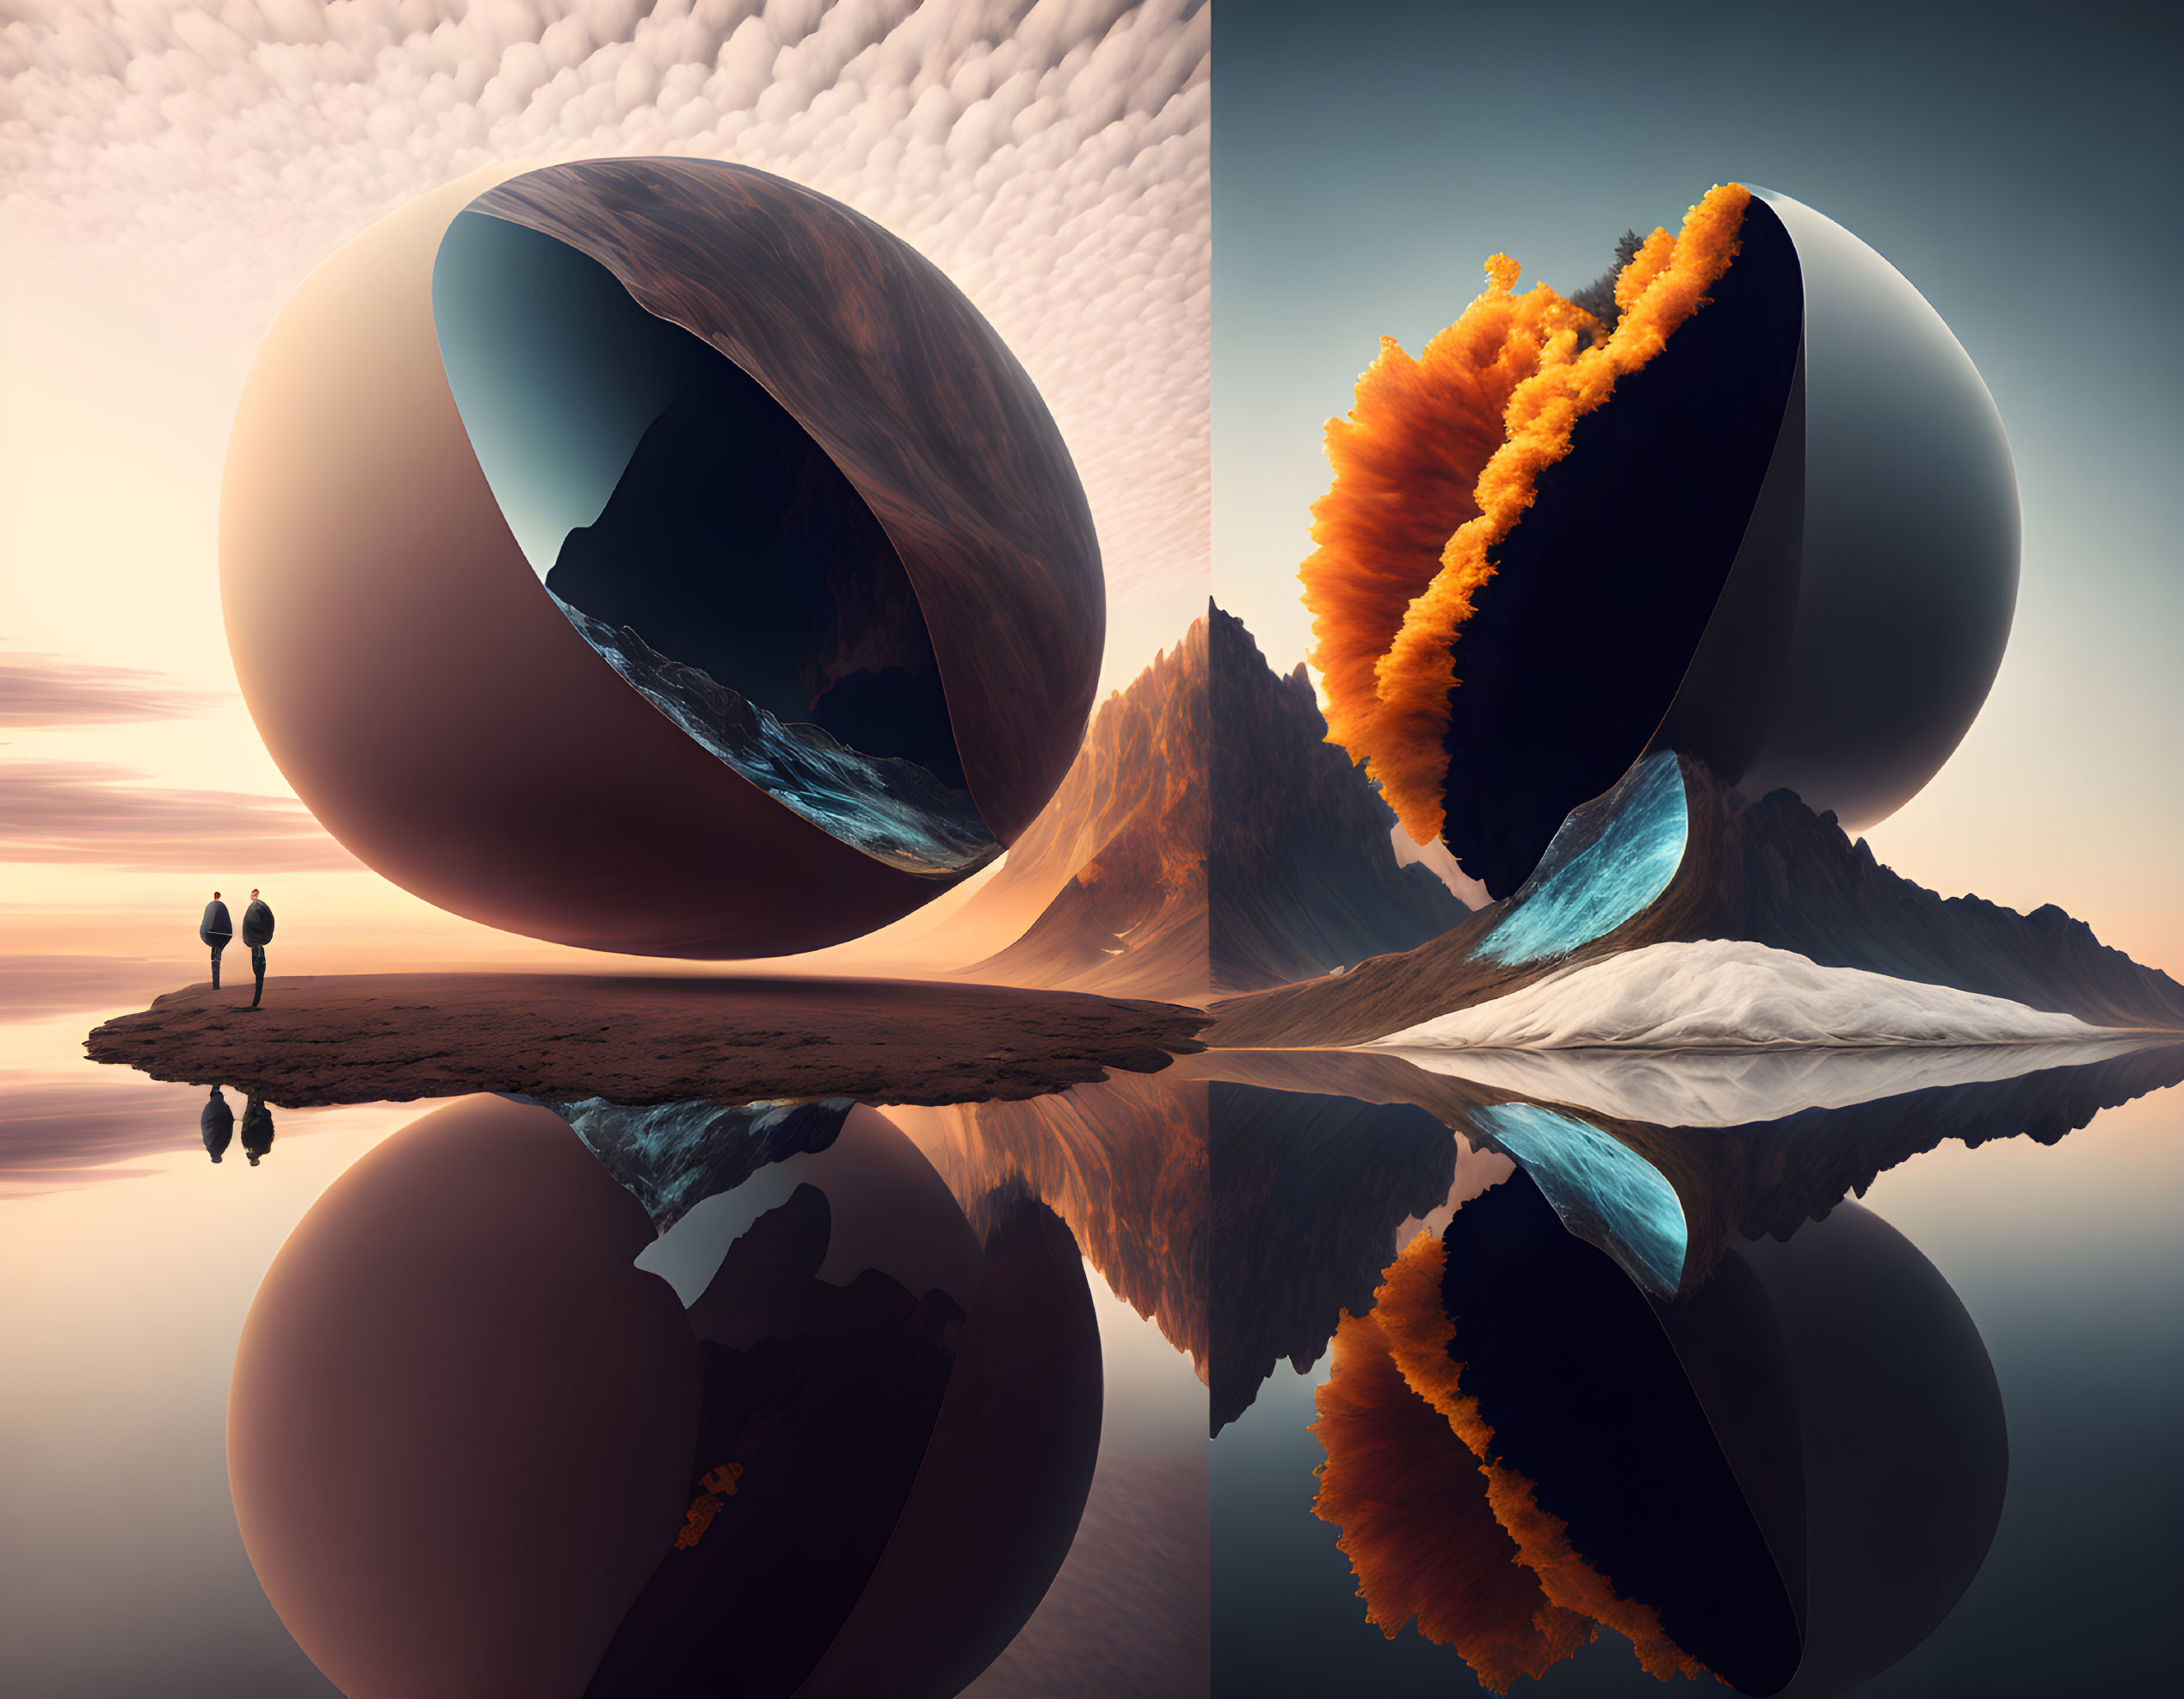 Surreal artwork featuring two figures and a reflective sphere on a shore